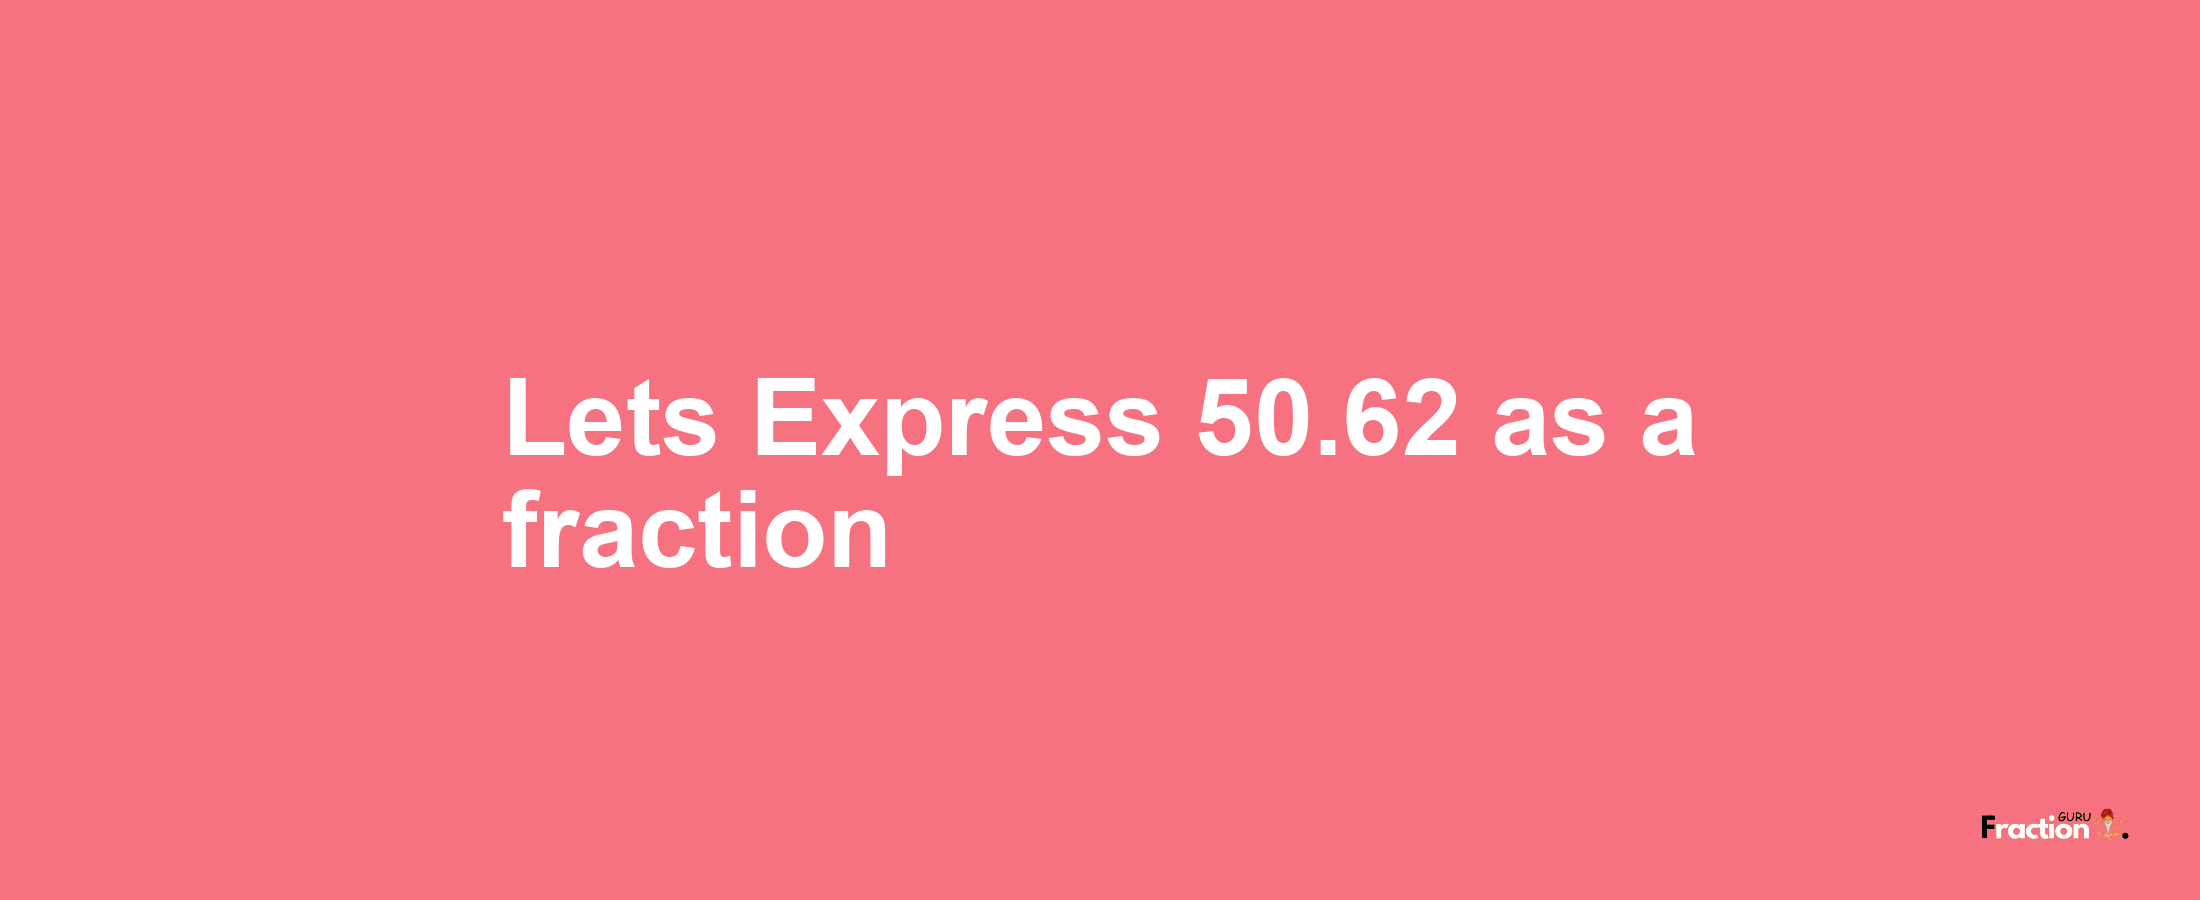 Lets Express 50.62 as afraction